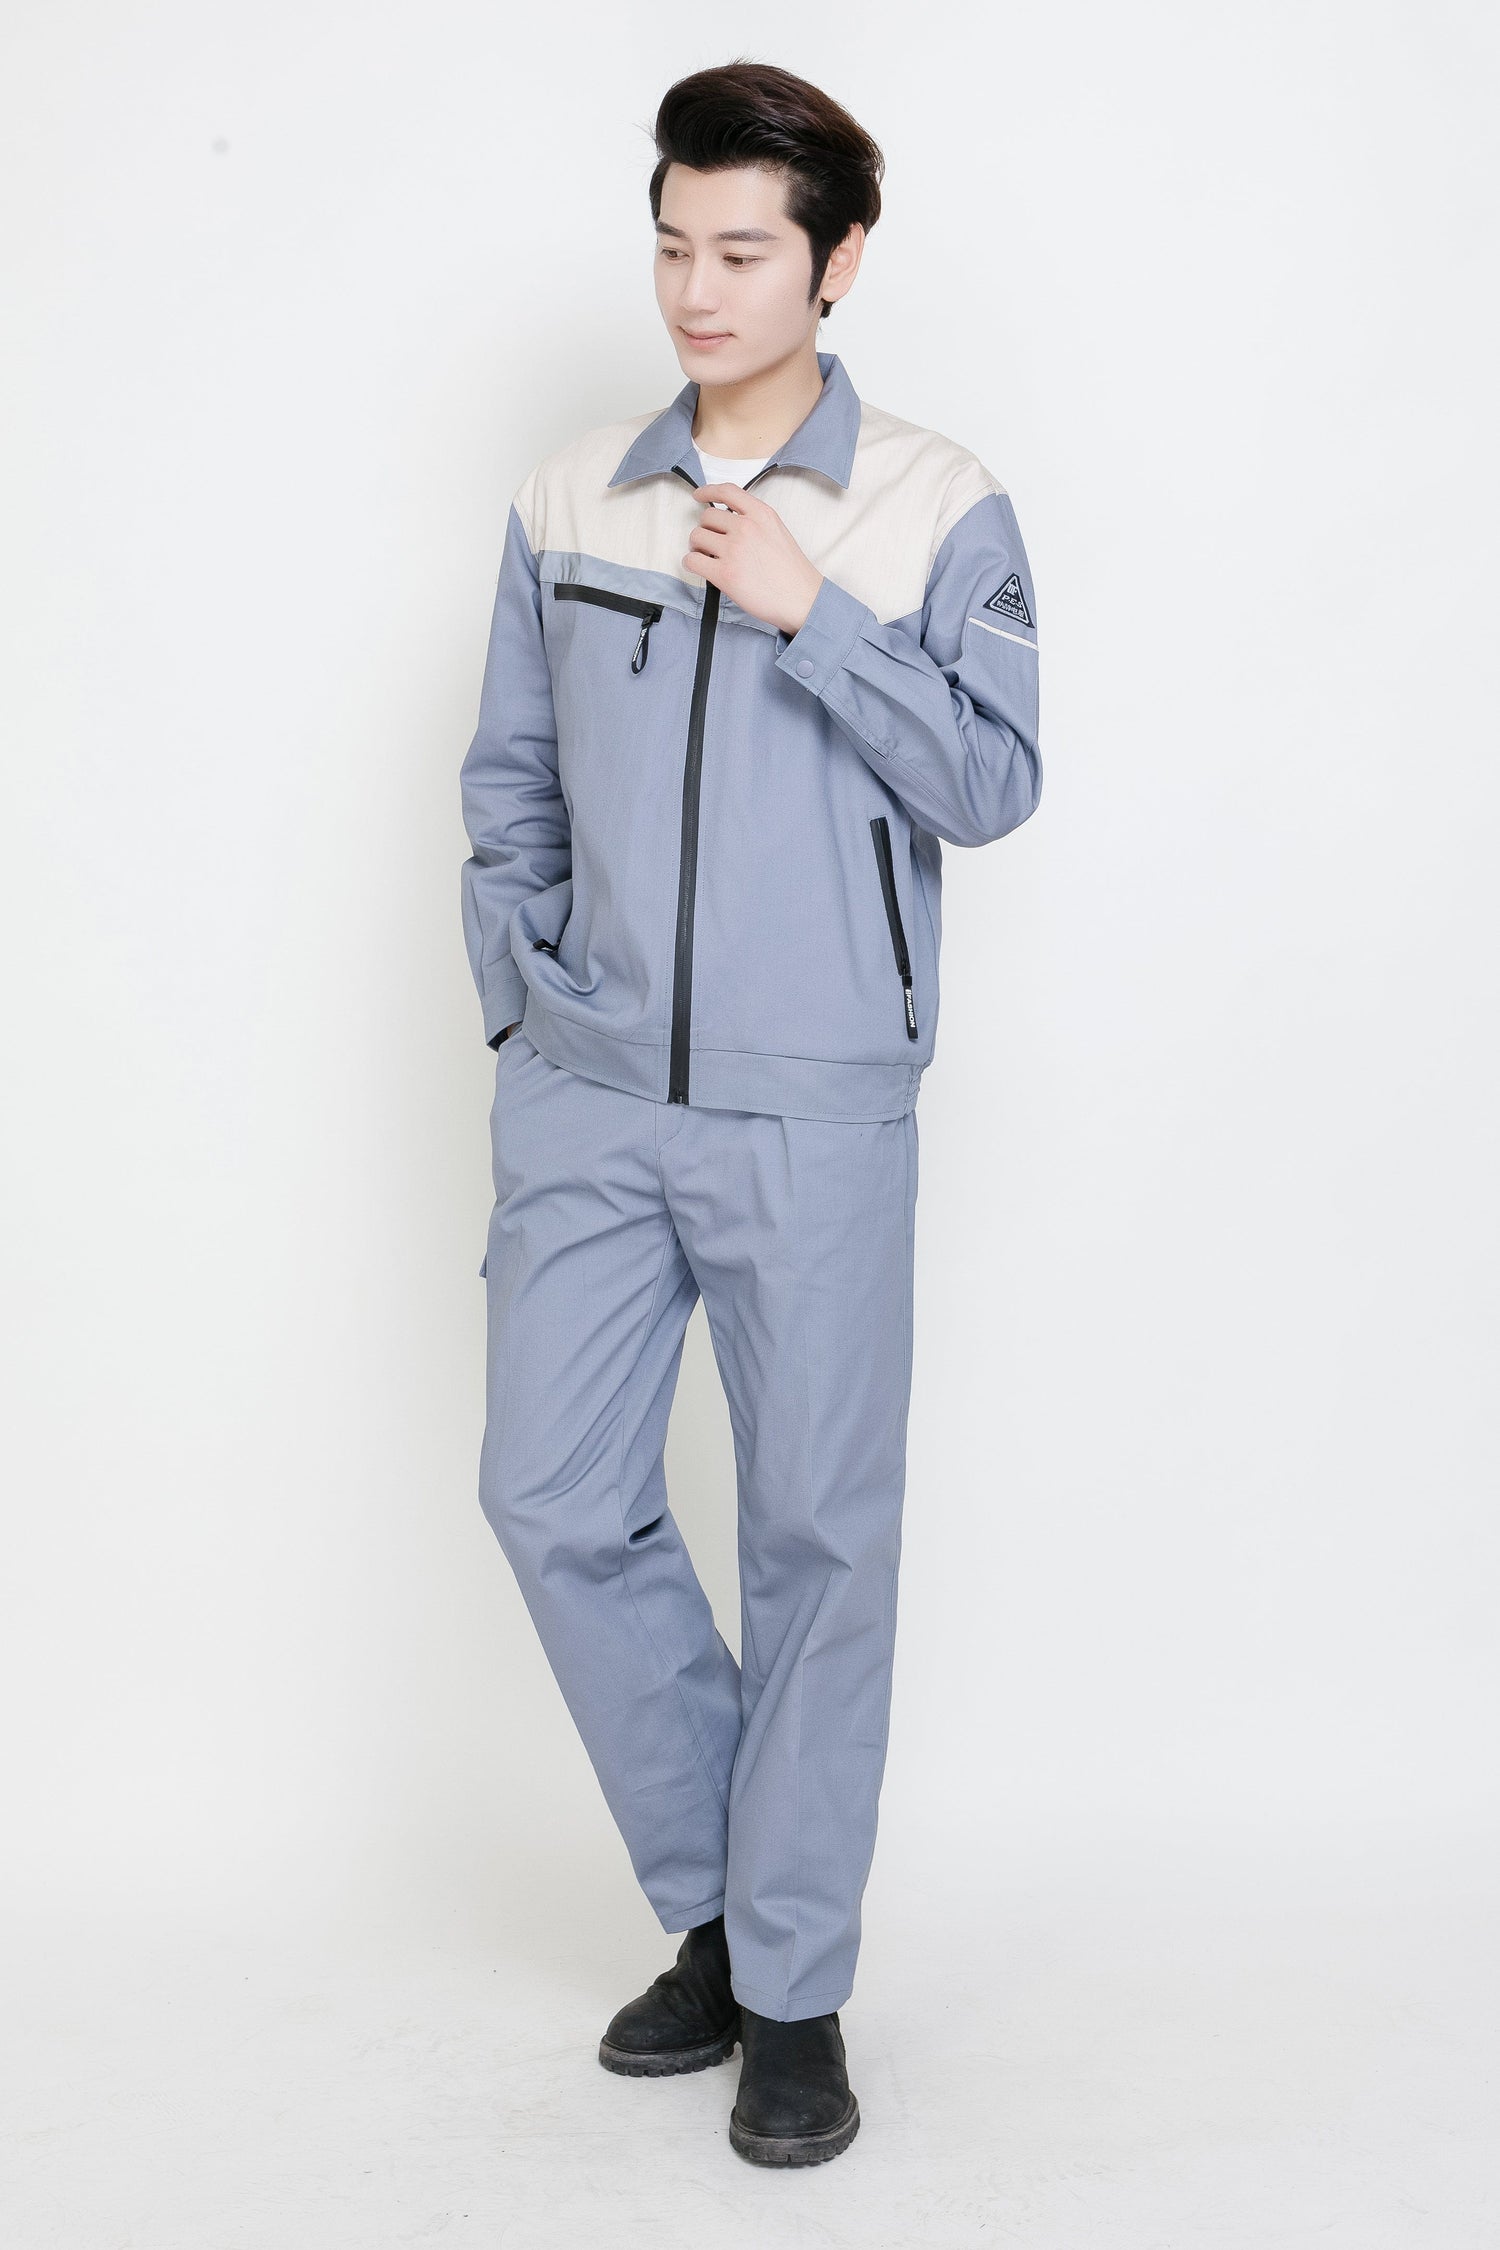 Corals Trading Co. 可樂思百貨商行 涤棉抗静电 Spring and Autumn style long-sleeved anti-static work clothes series SD-AS-W403